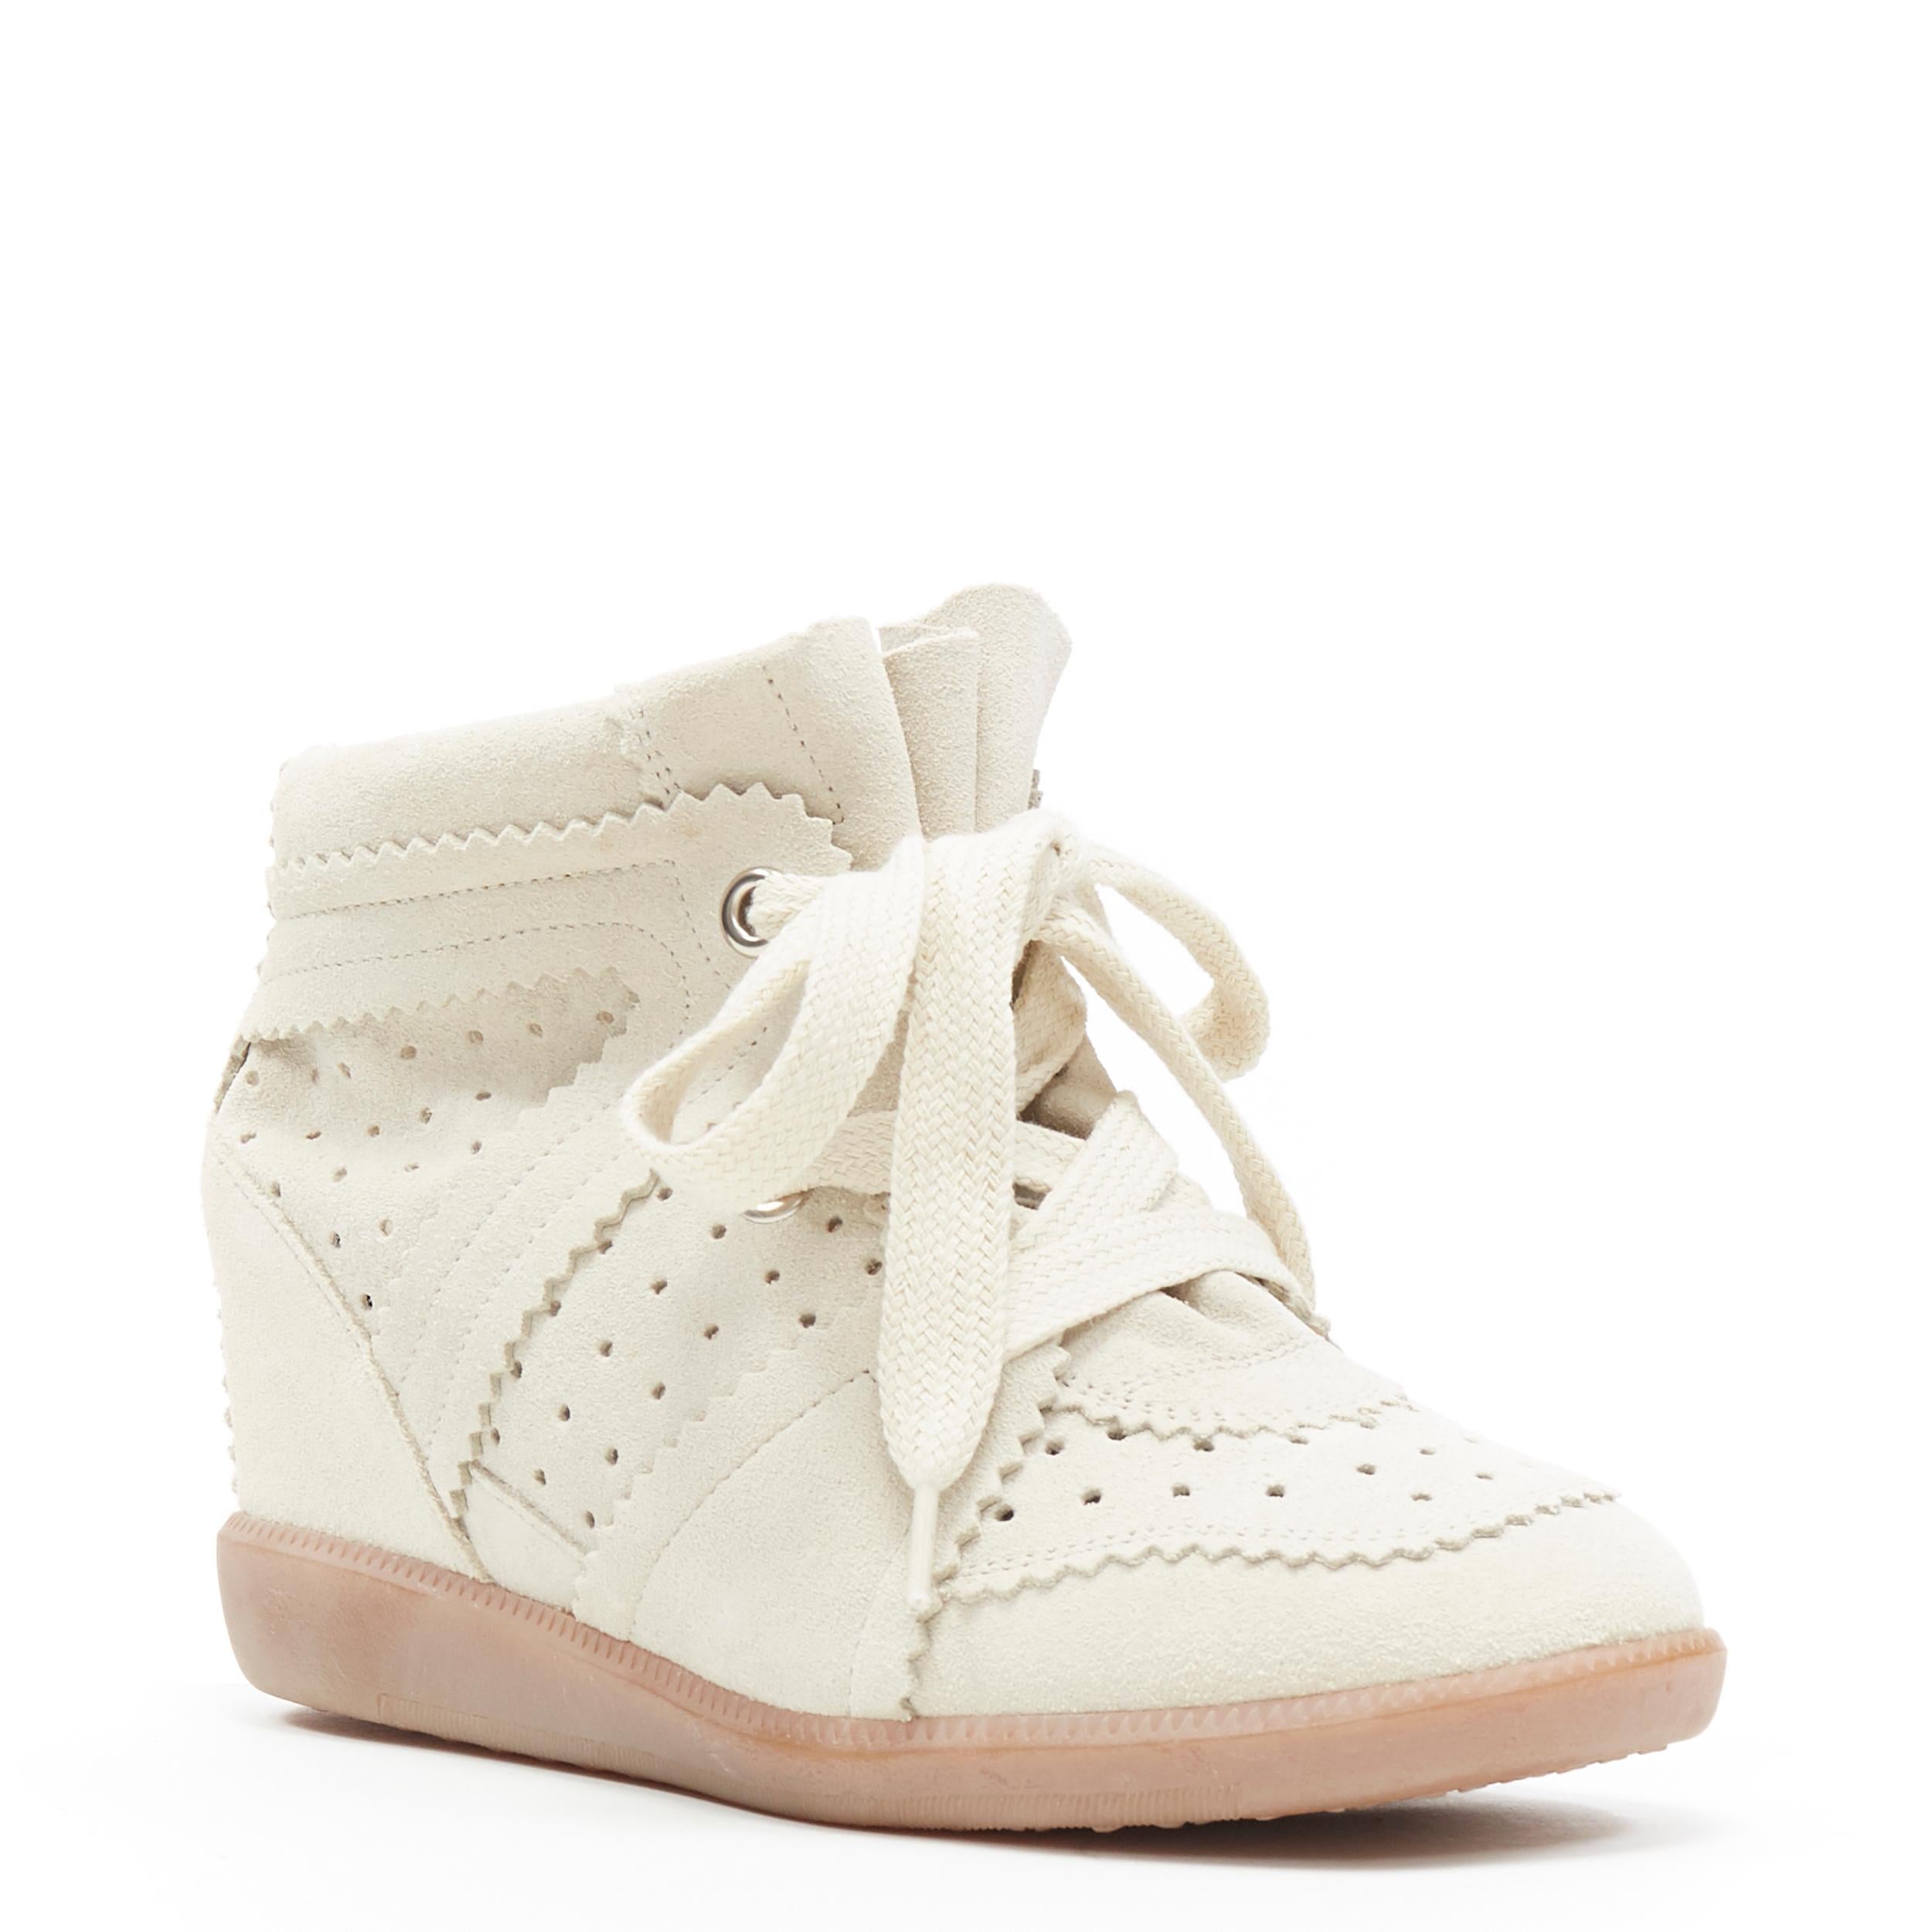 new ISABEL MARANT Bobby Chalk beige suede lace up concealed wedge sneaker EU38
Brand: Isabel Marant Etoile
Designer: Isabel Marant
Model Name / Style: Bobby
Material: Suede
Color: Beige
Pattern: Solid
Closure: Lace up
Lining material: Leather
Extra